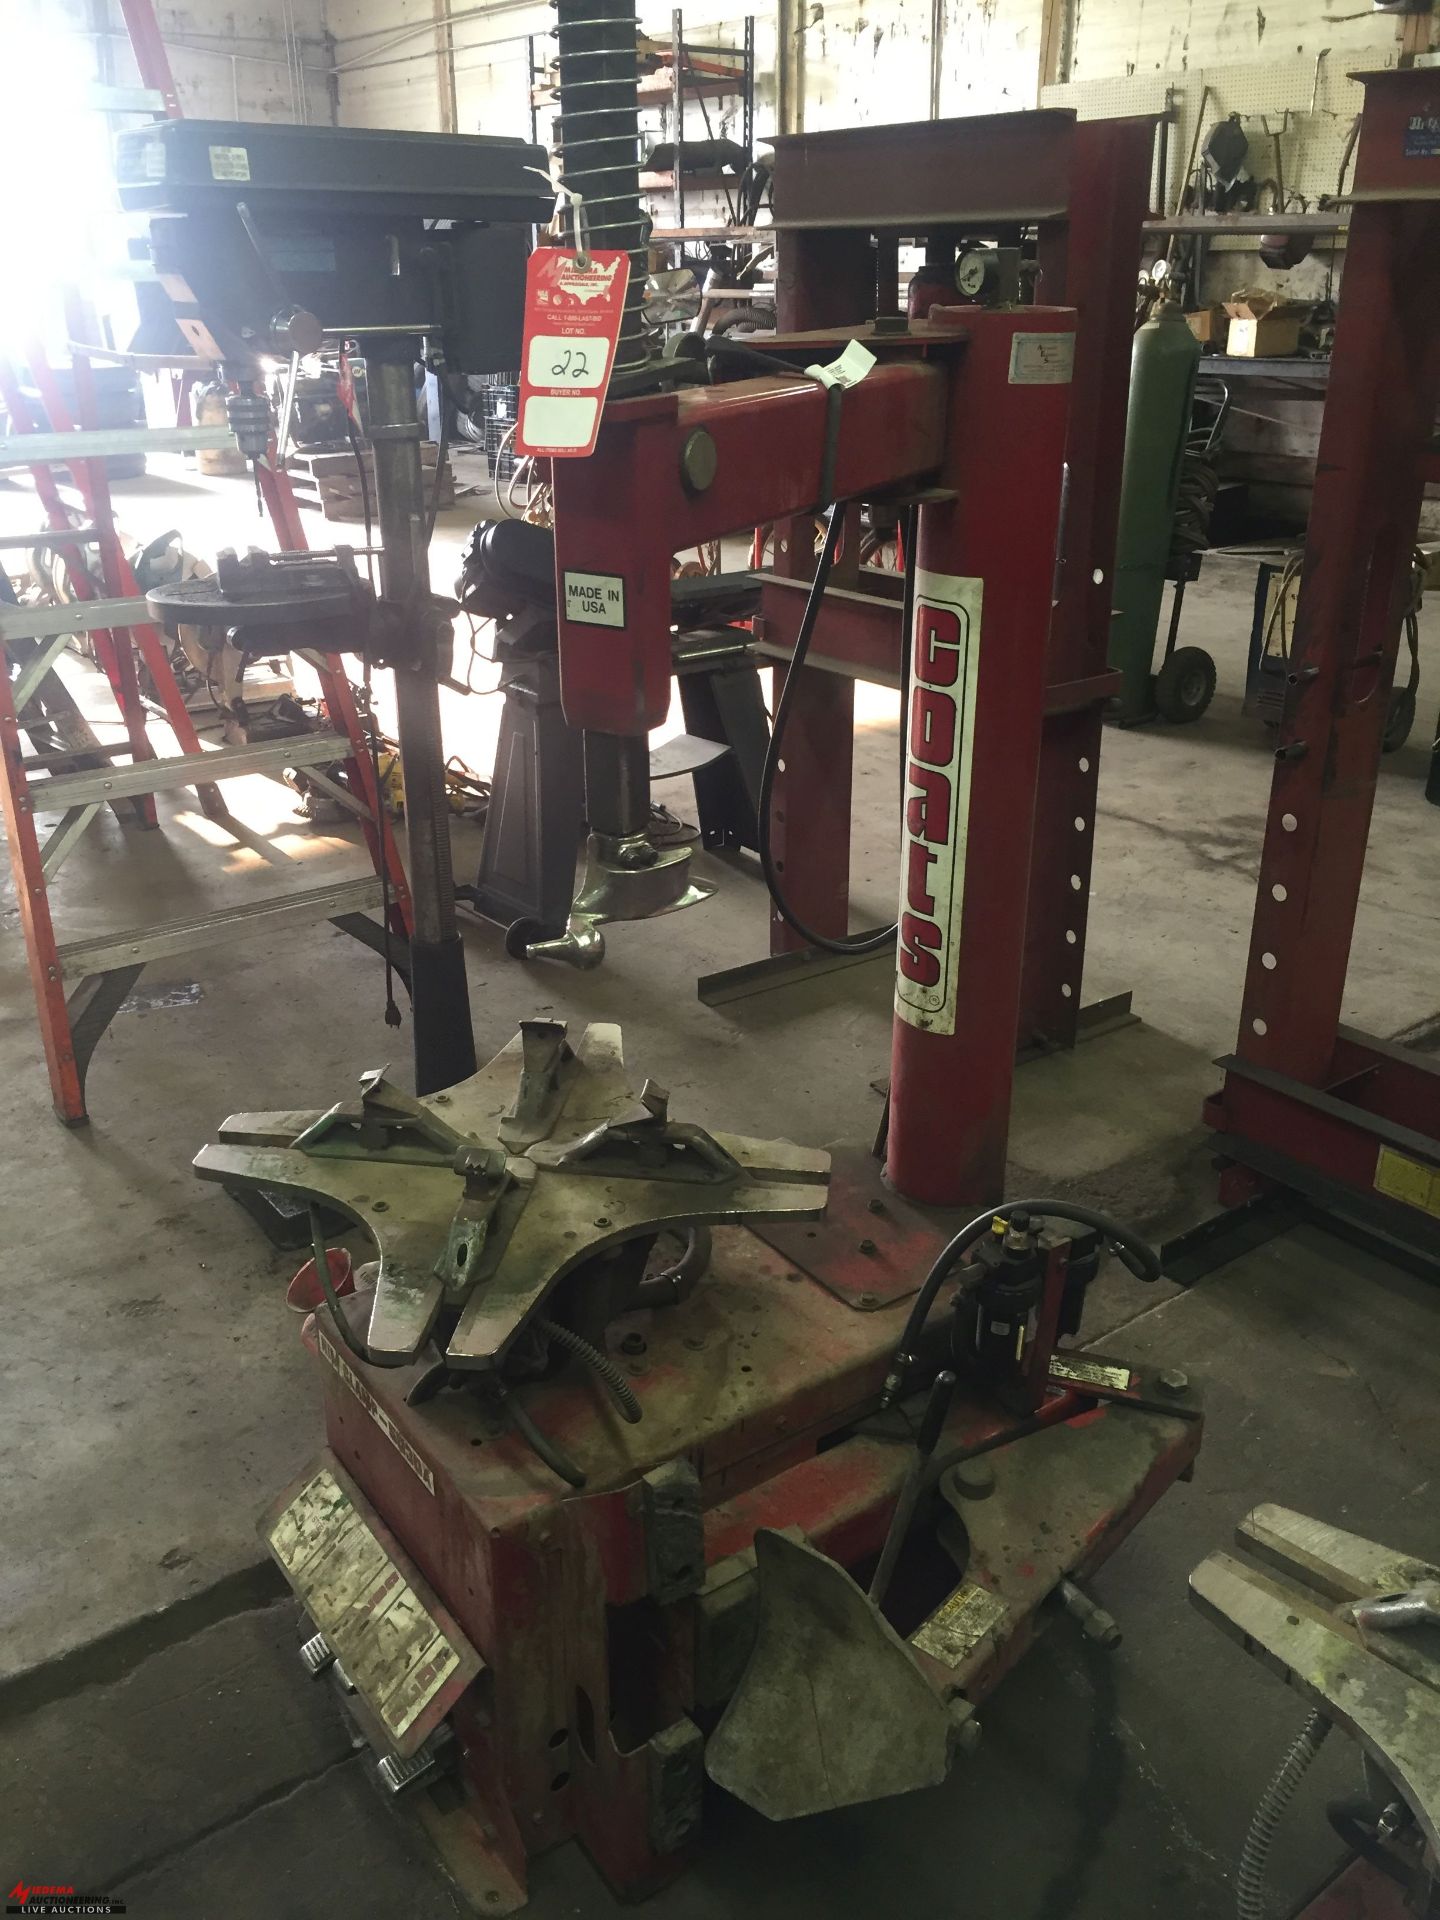 COATS 5030A RIM CLAMP TIRE MACHINE [LOCATION: EAST WINANS STREET LOCATION] - Image 2 of 3